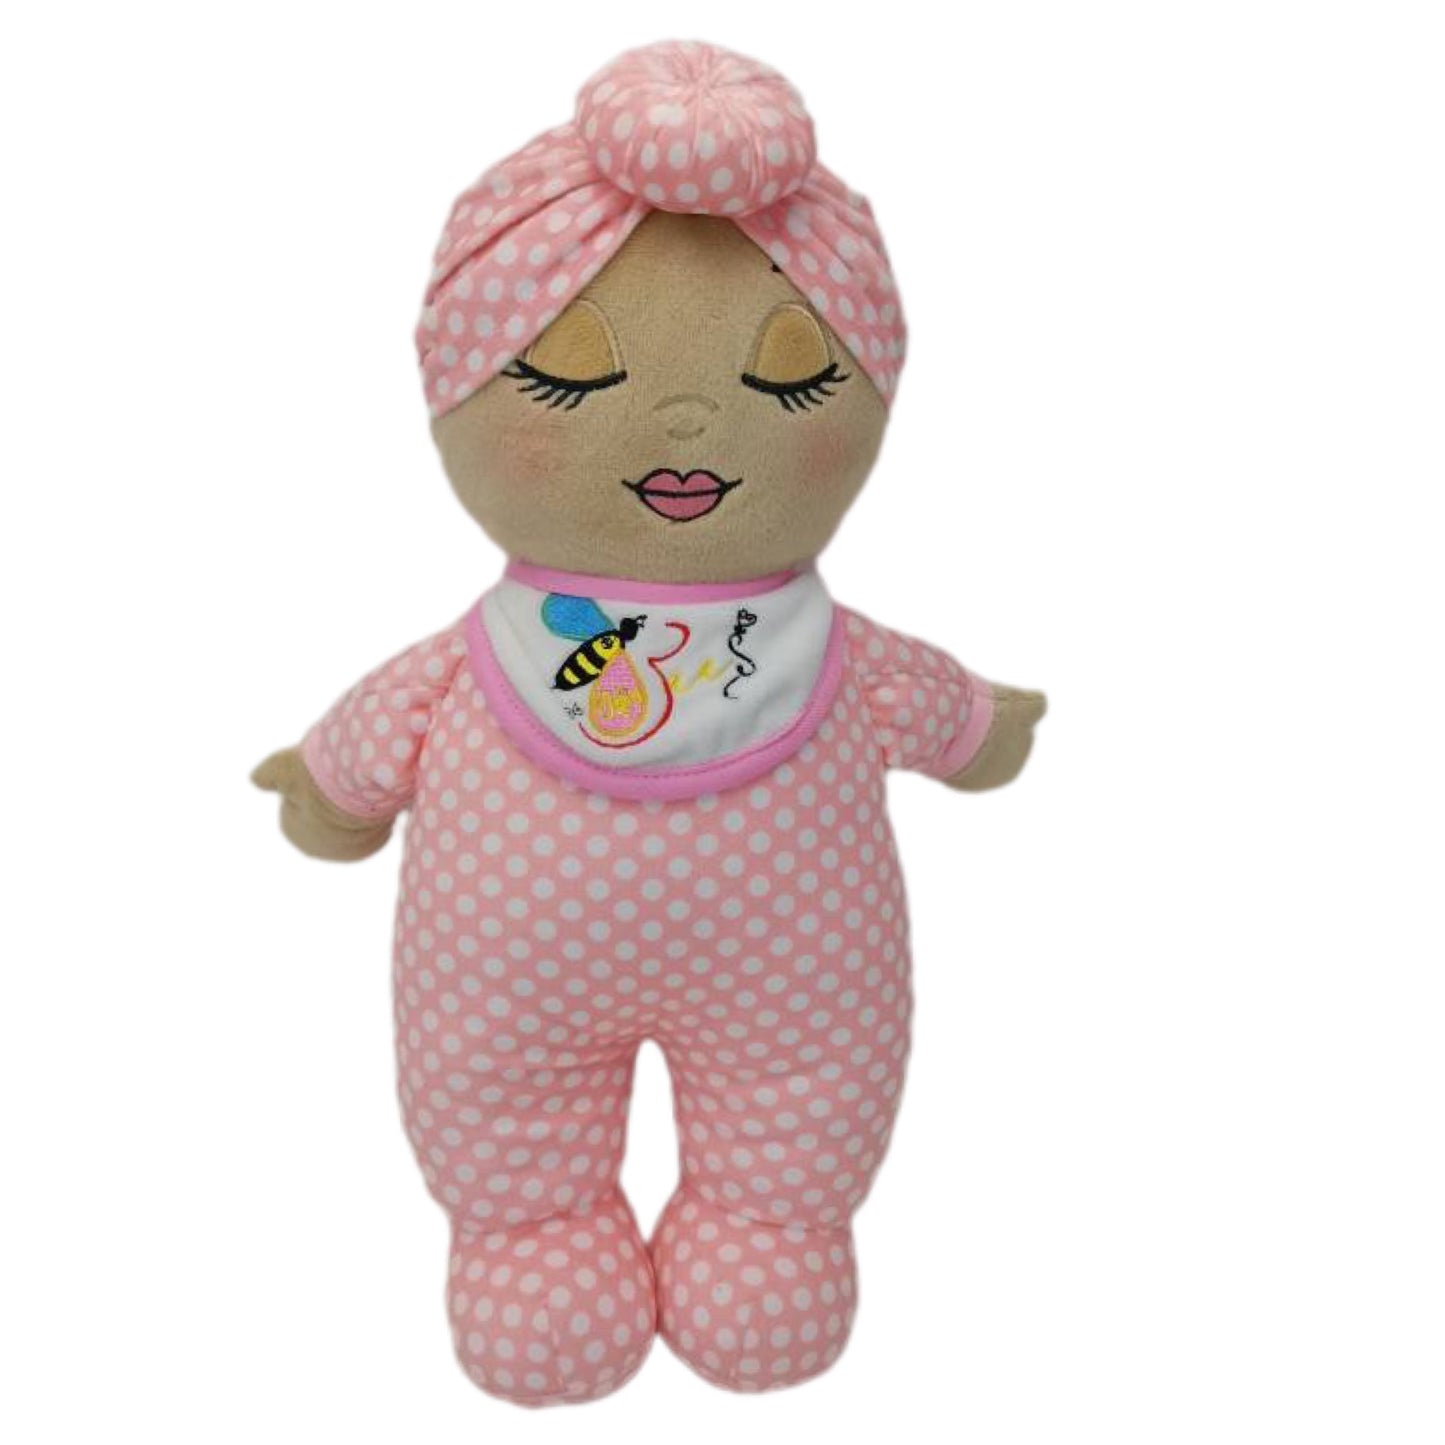 Nu'Bee Plush Baby Doll - Pink